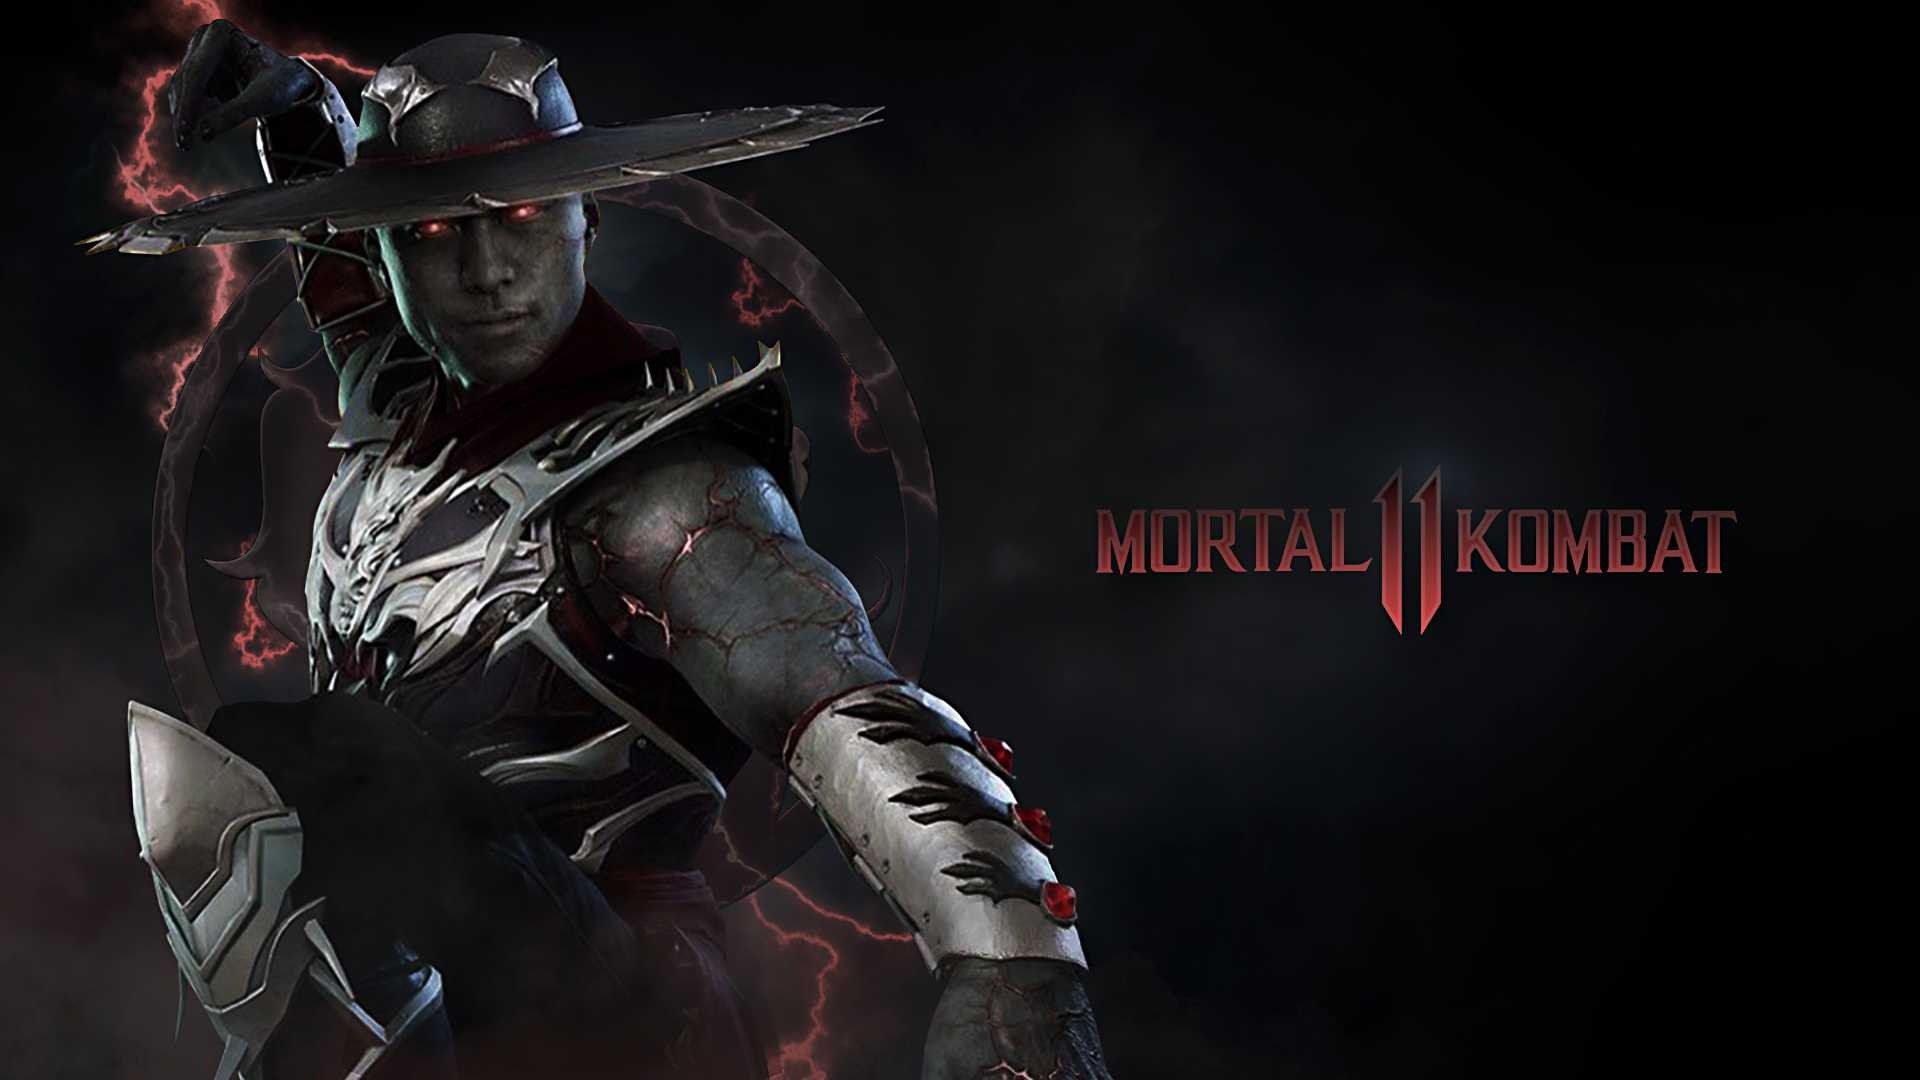 Kung Lao, Movies, Awesome free HD wallpapers, 1920x1080 Full HD Desktop